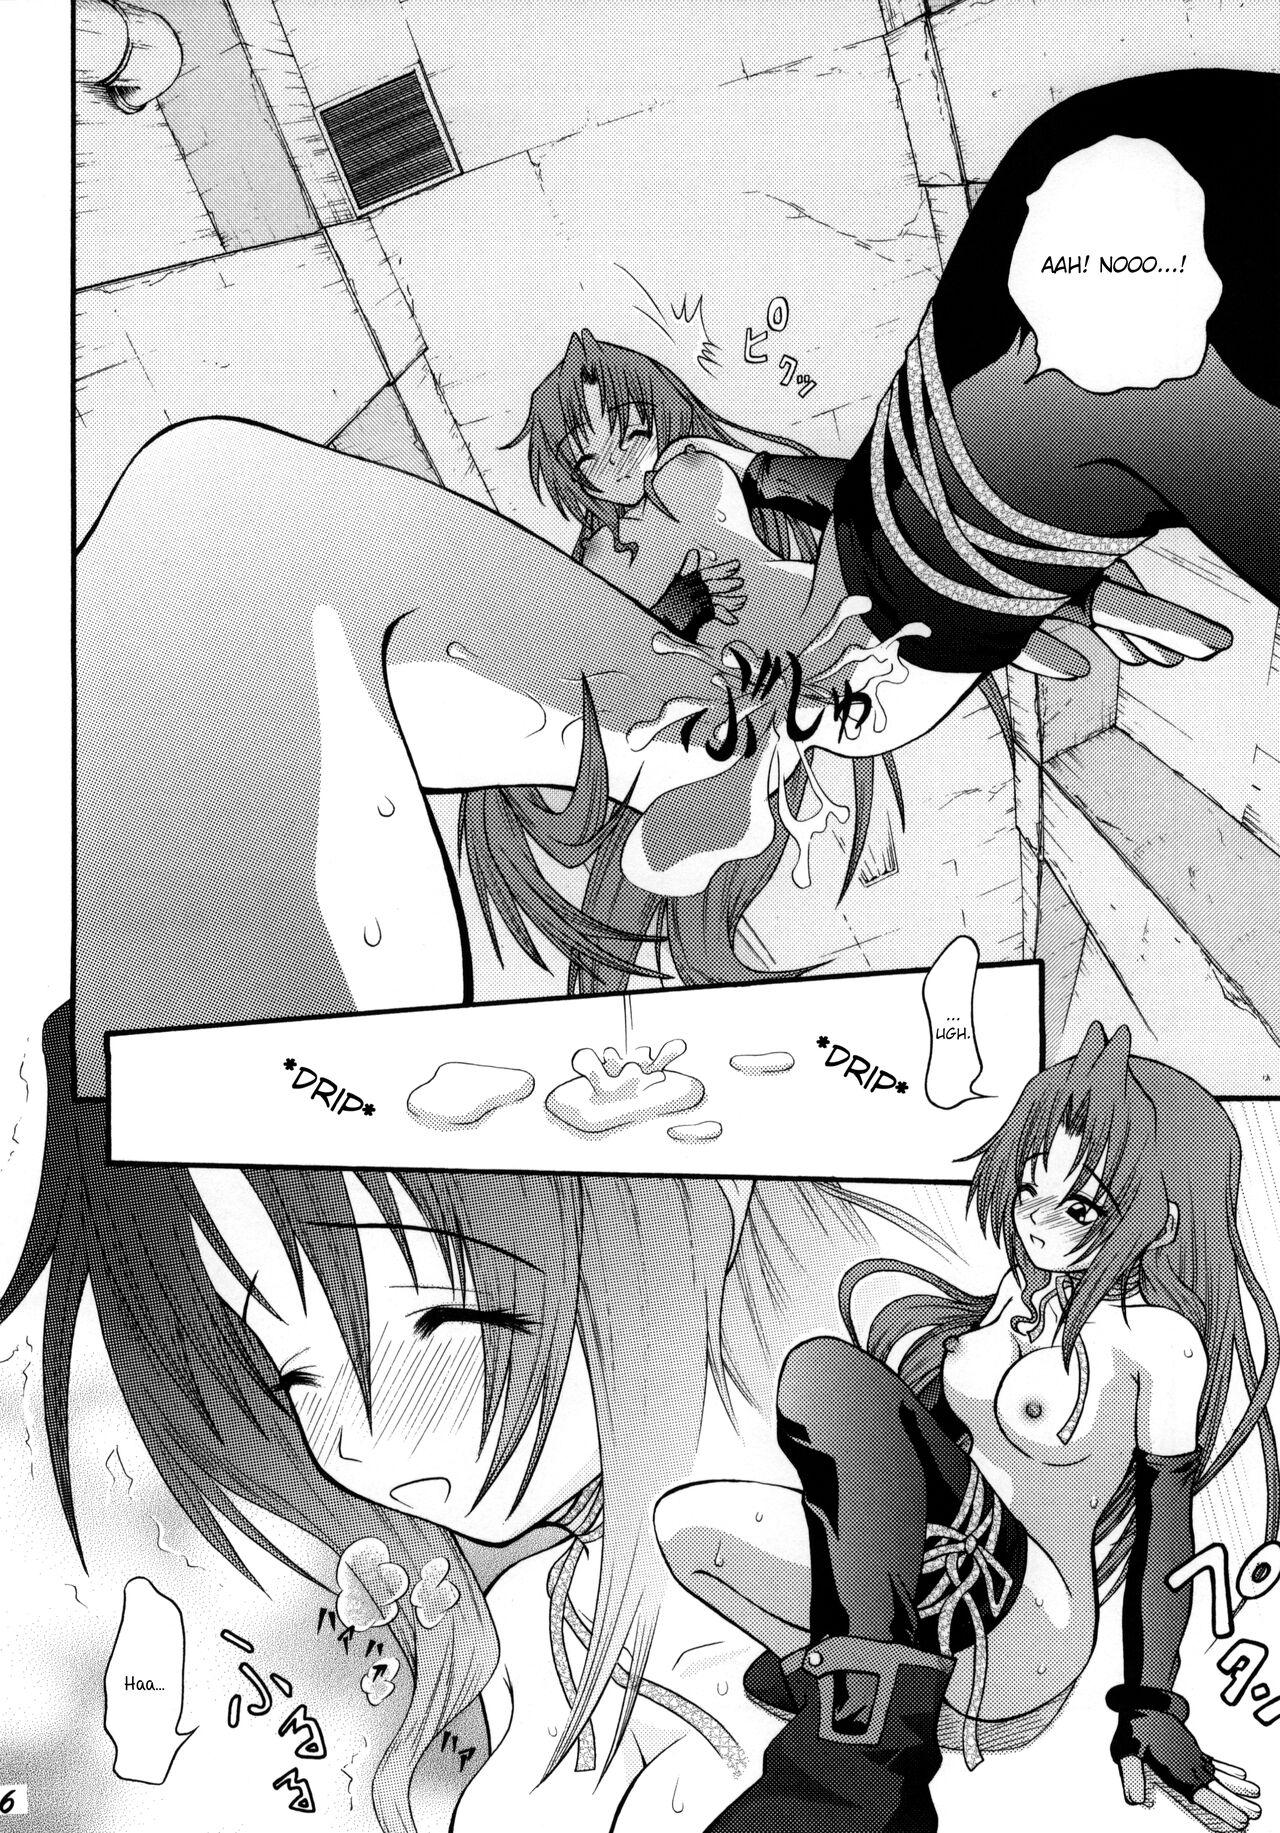 Femdom Anna Toko mo Konna Toko mo Elegant♪ | Both Places Like That and Places Like This Are Elegant♪ - Kiddy grade Wanking - Page 5